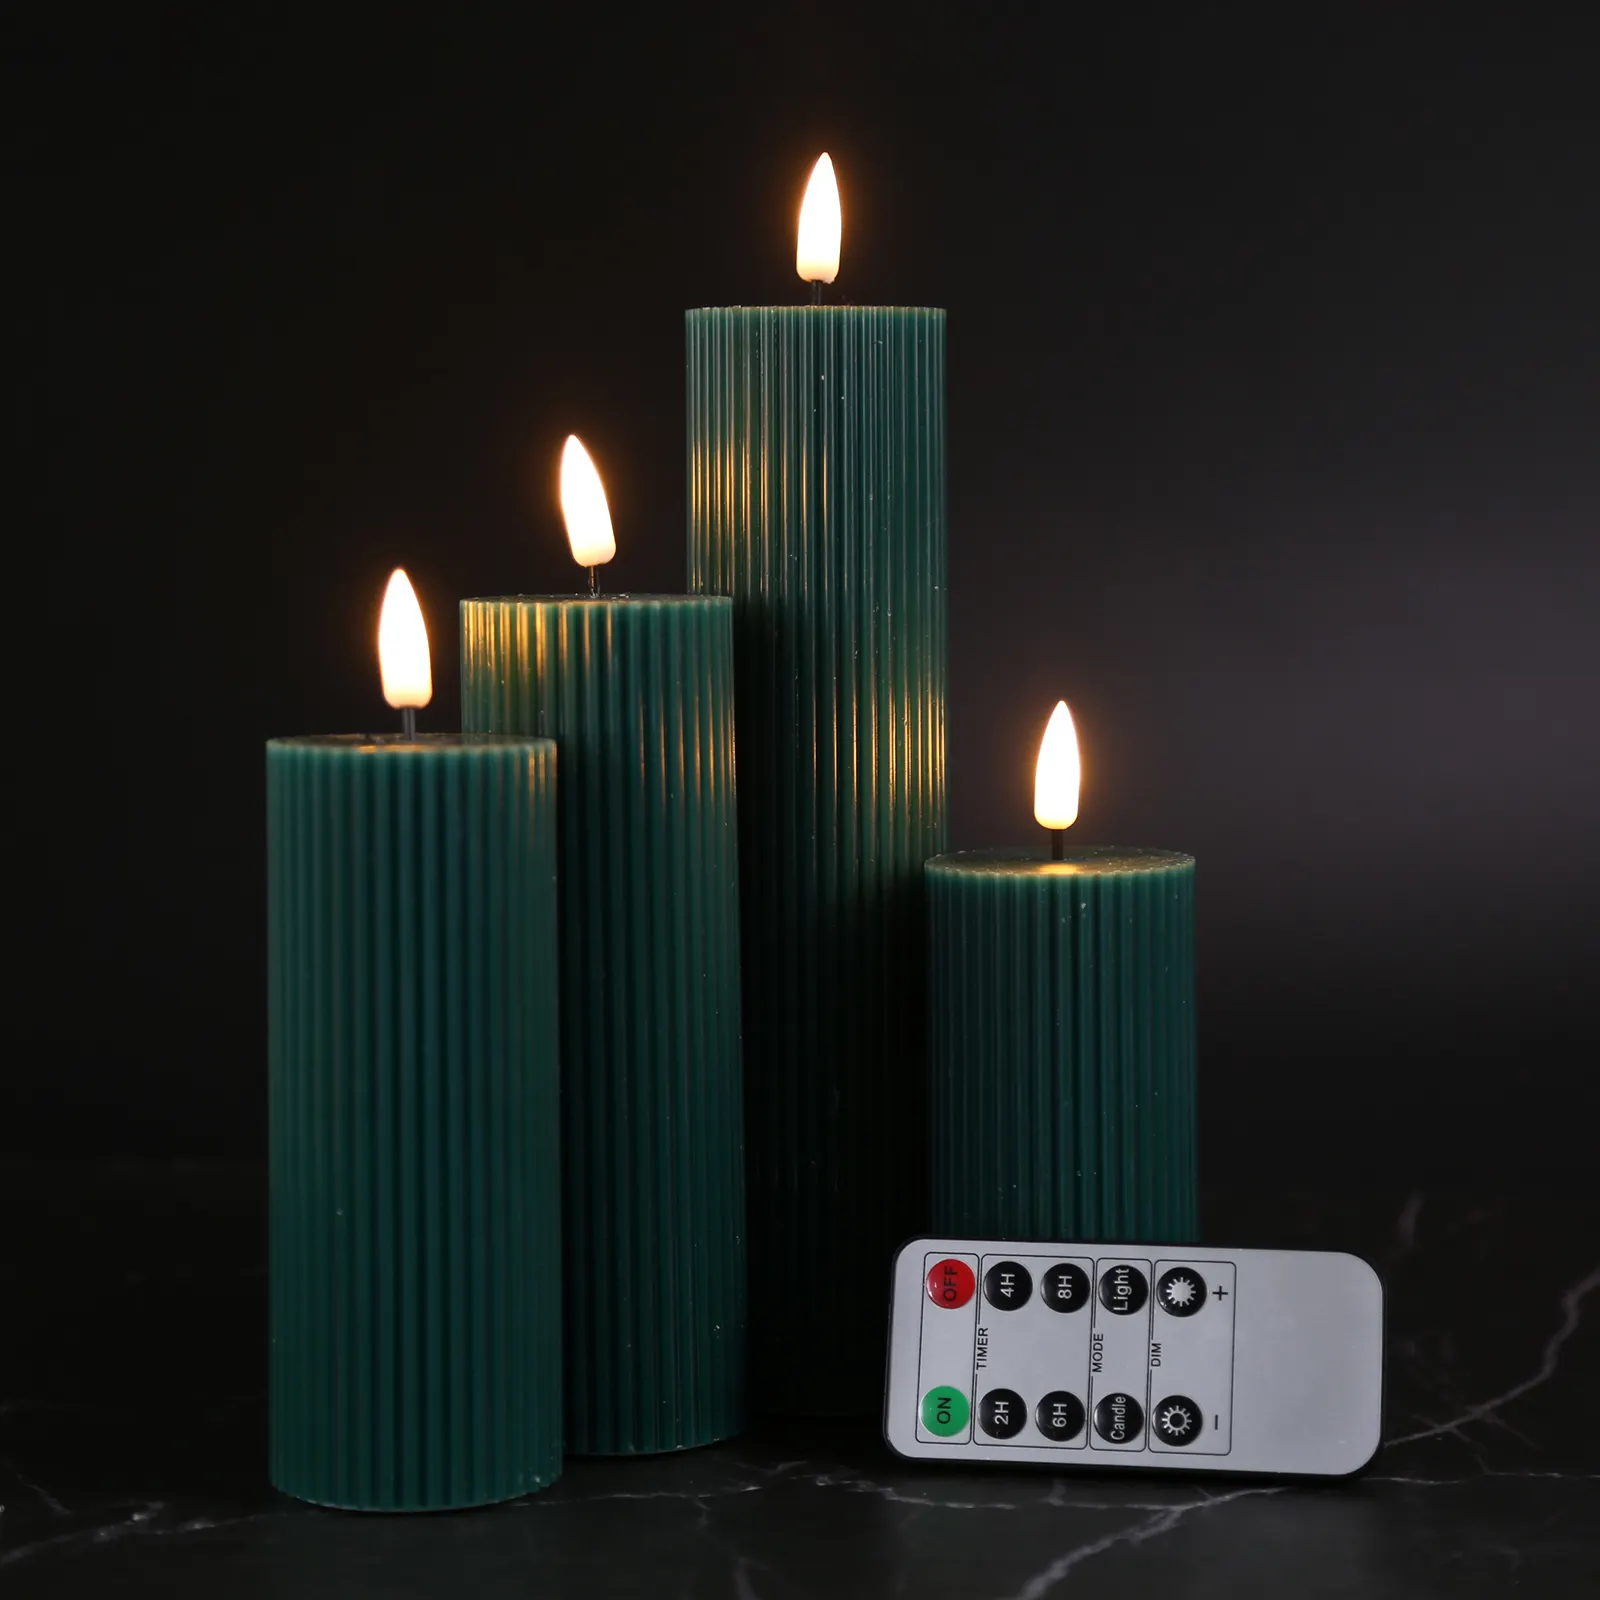 Led Remote Candle Matti's Best Seller 3d Real Flame Pillar Battery Operated Home Decoration Remote Timer Led Candle